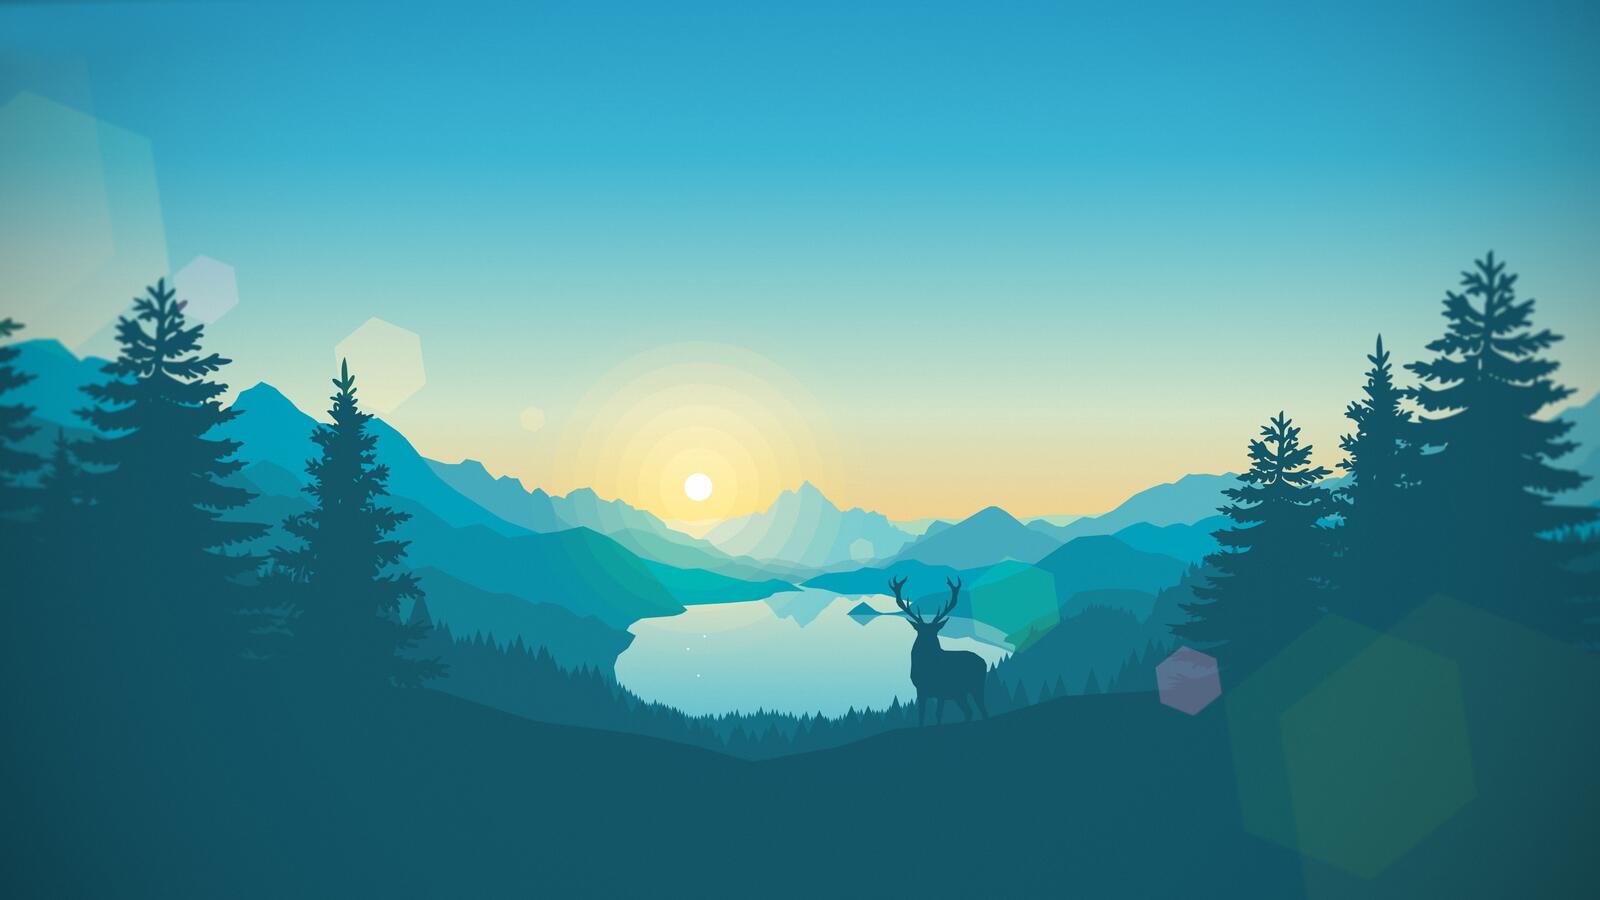 Free photo Minimalist landscape with a deer standing in the woods against a lake